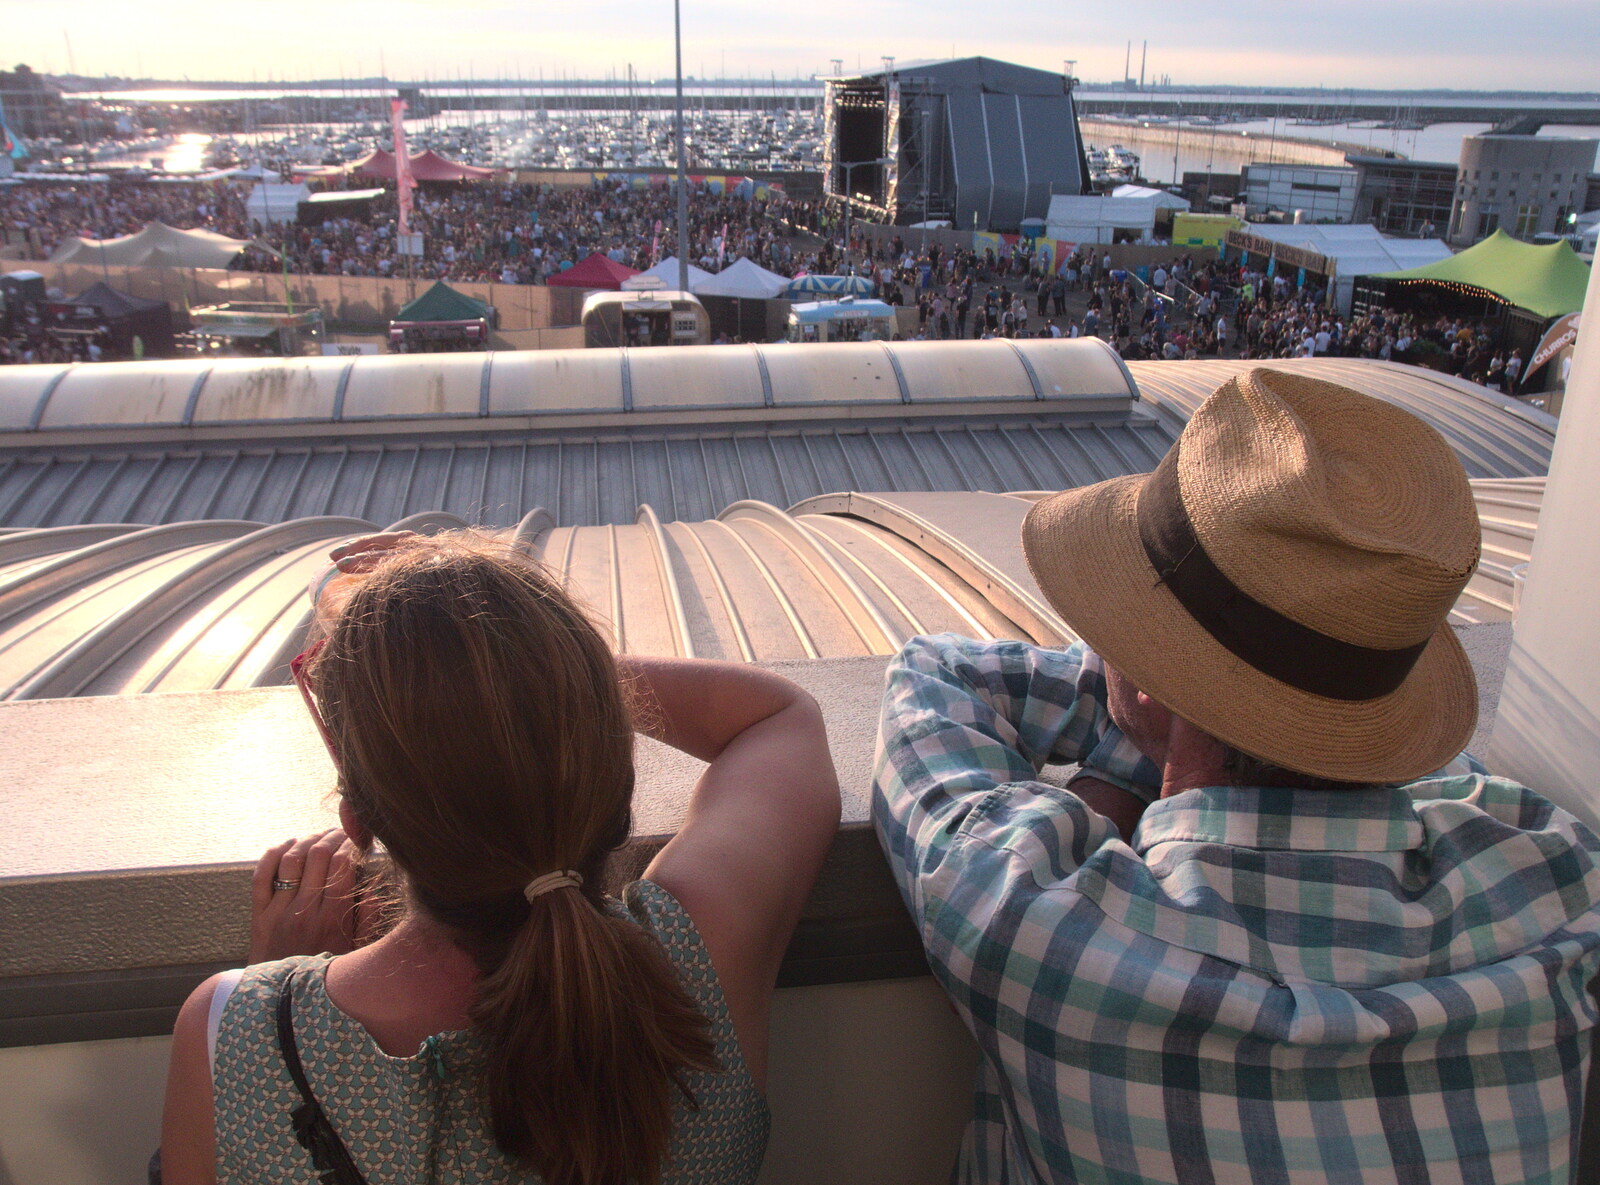 Isobel and Wayne look out over Beatyard from Beatyard Festival, Dún Laoghaire, County Dublin, Ireland - 5th August 2018